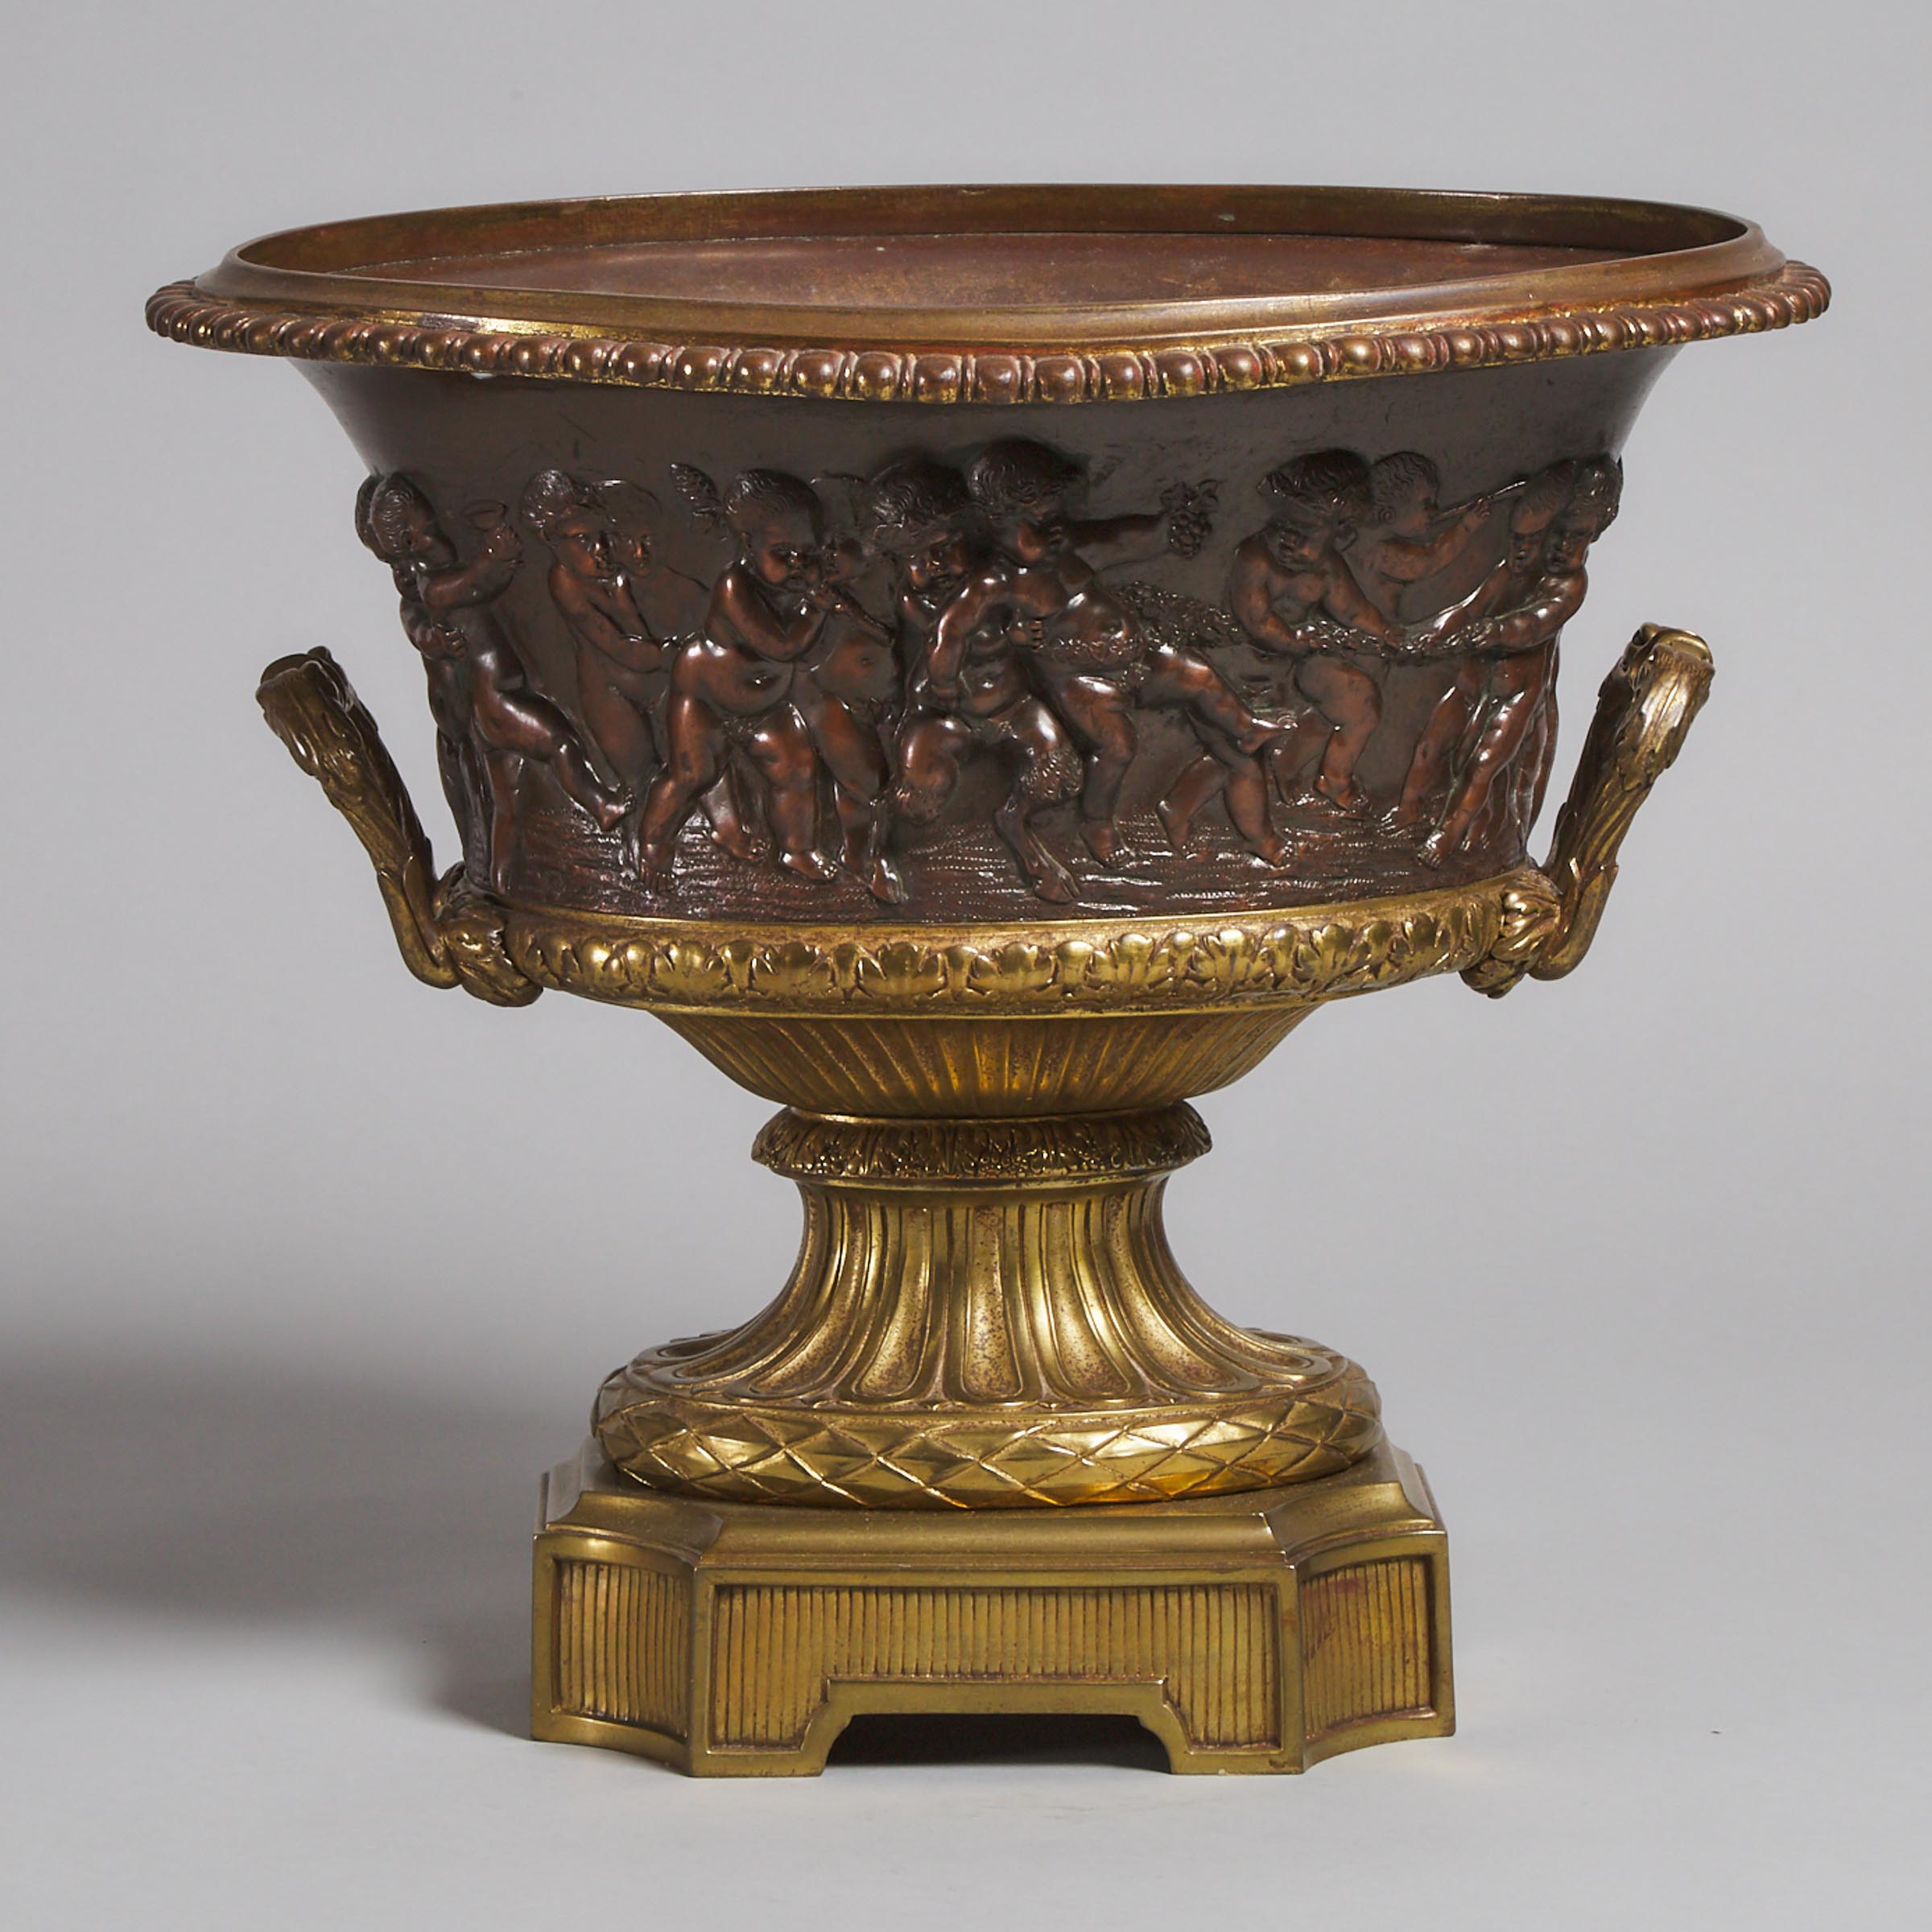 French Neoclassical Gilt and Patinated Bronze Urn Form Jardiniere, 19th century